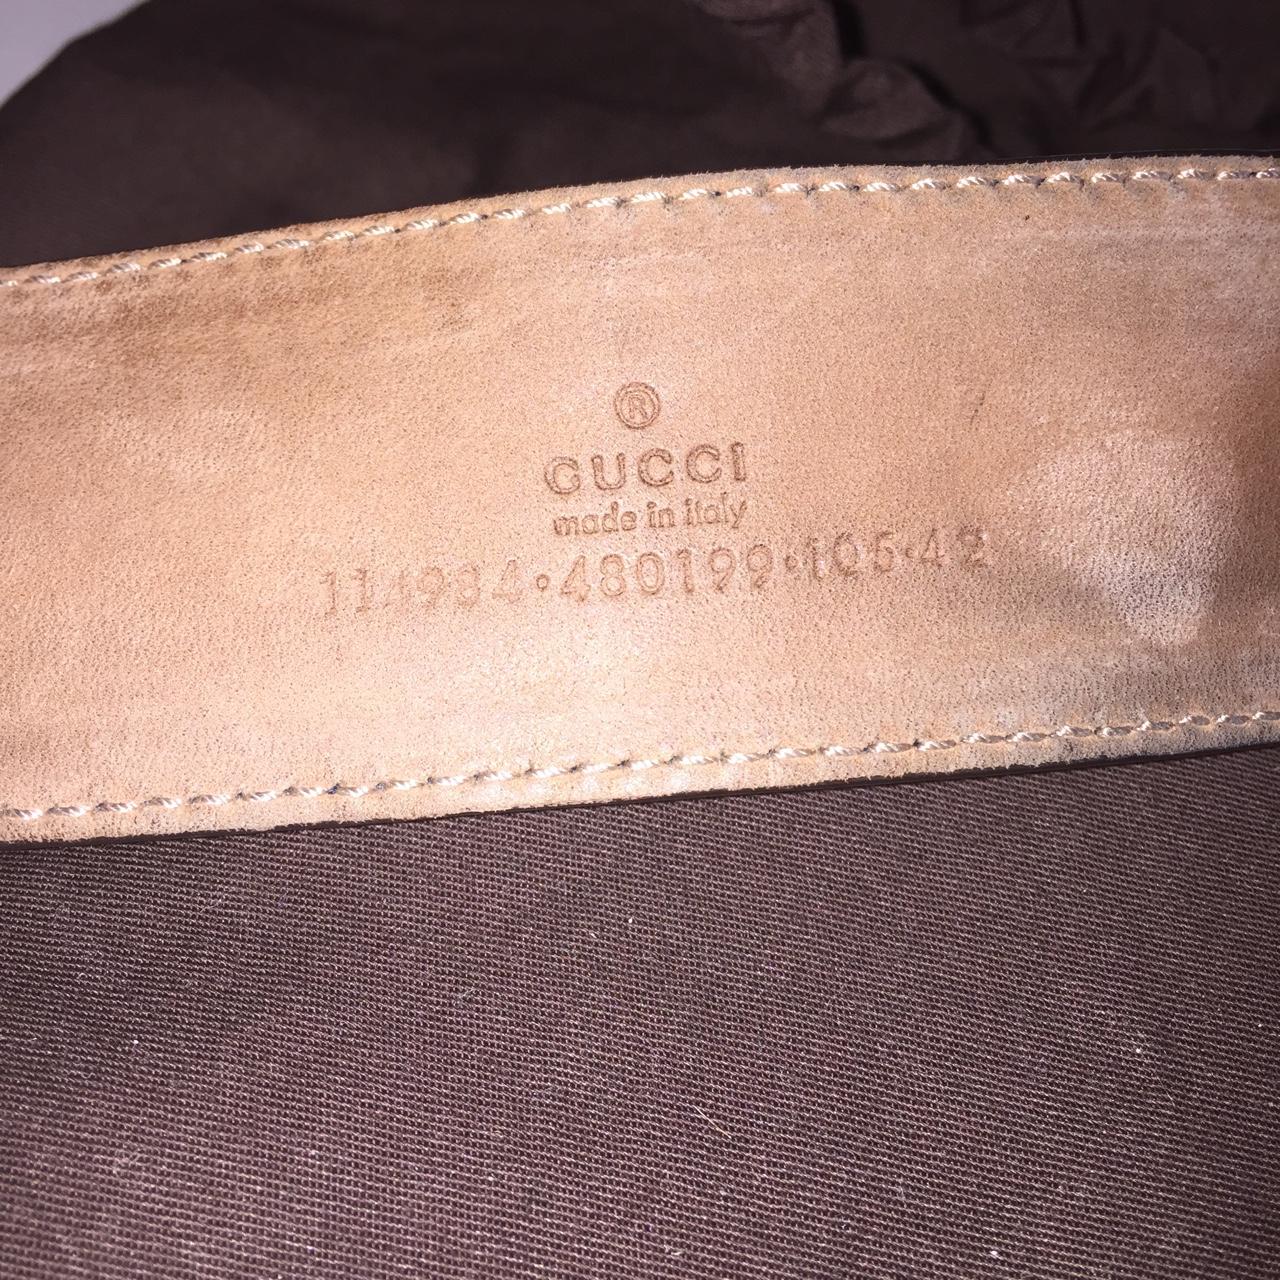 authentic burberry gold belt retail $489 selling for - Depop